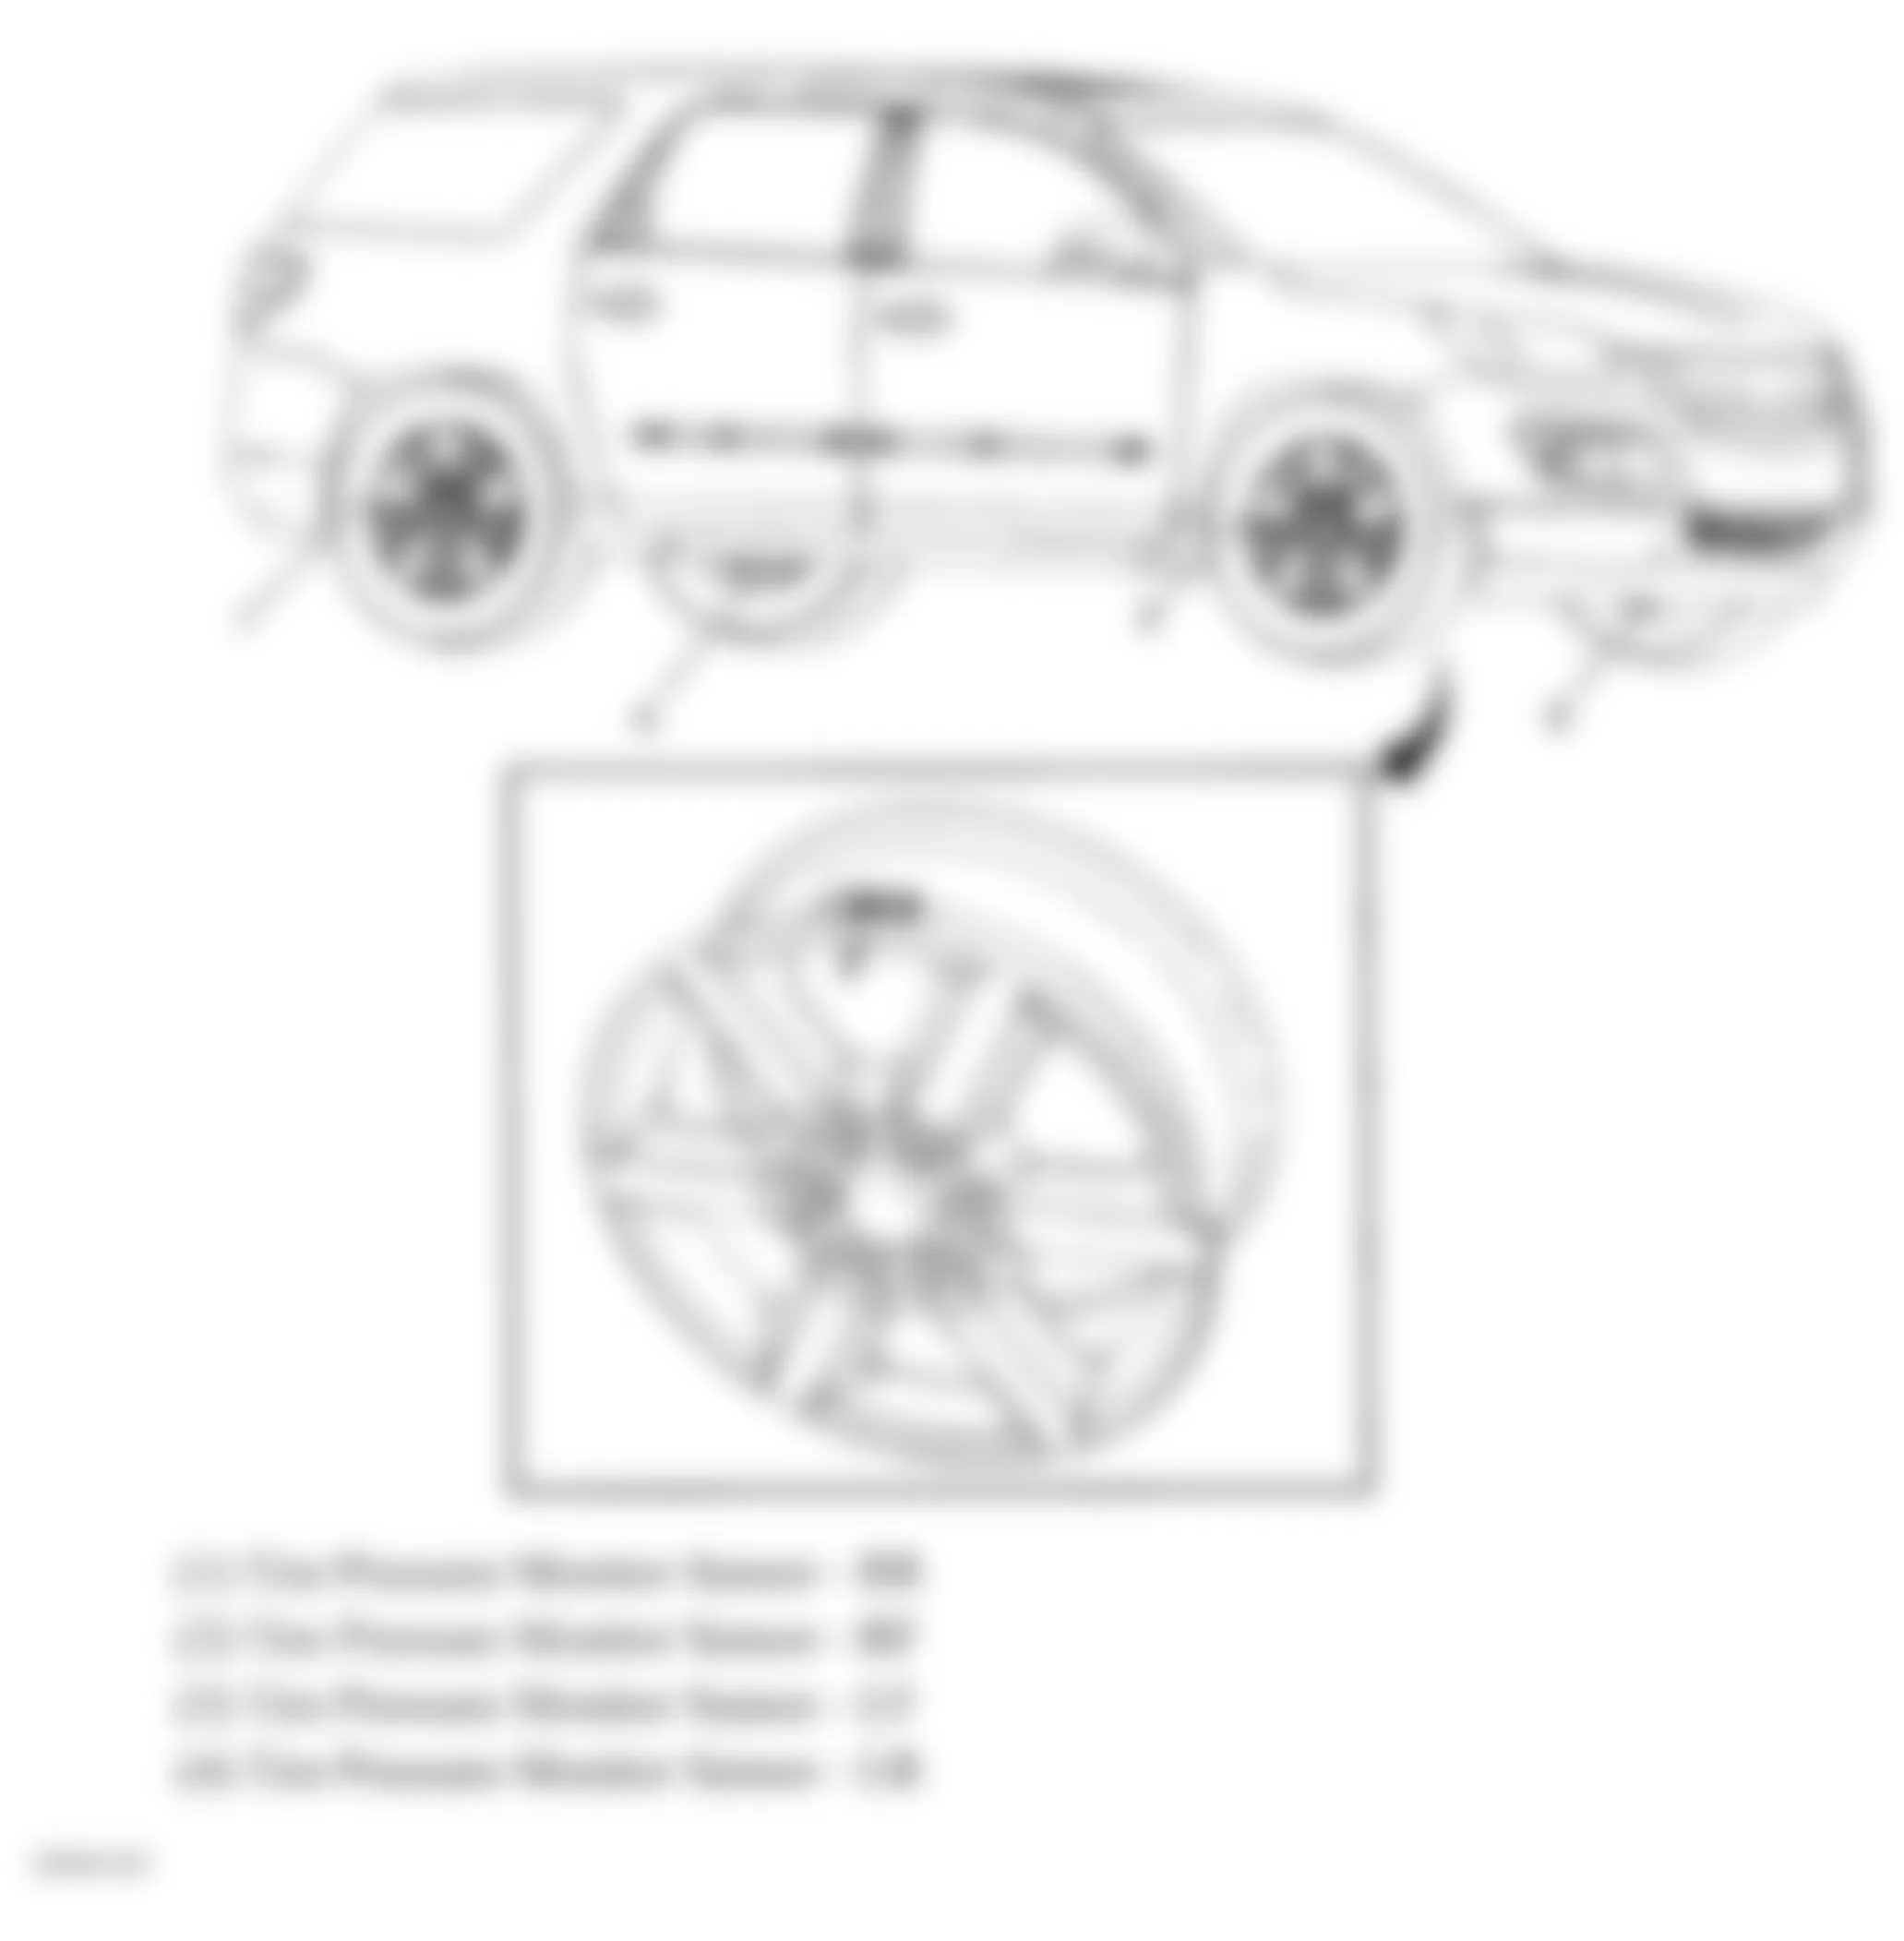 GMC Acadia SLE 2008 - Component Locations -  Vehicle Tire Overview